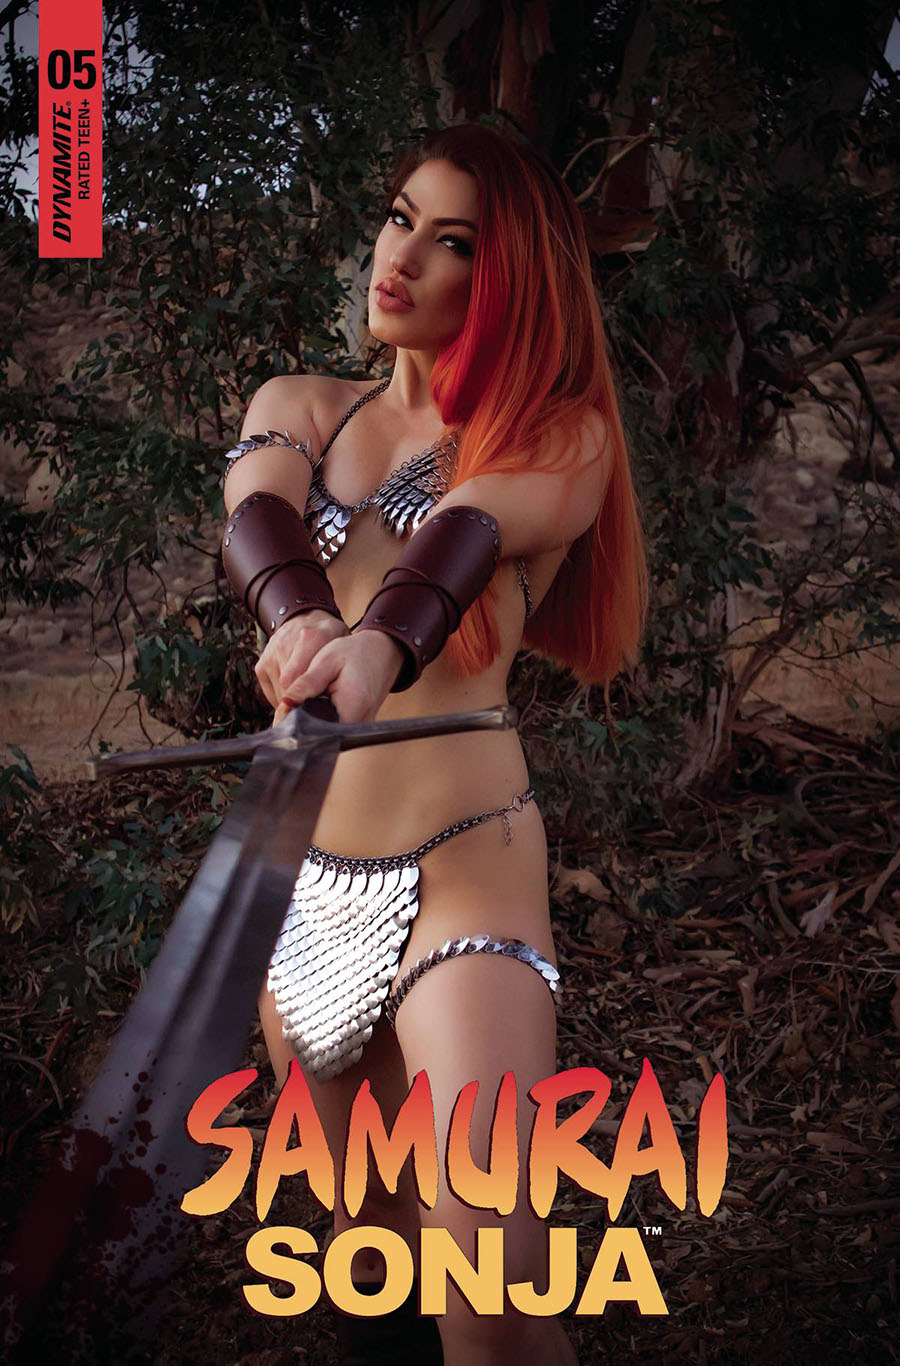 Samurai Sonja #5 Cover E Variant Gracie The Cosplay Lass Cosplay Photo Cover